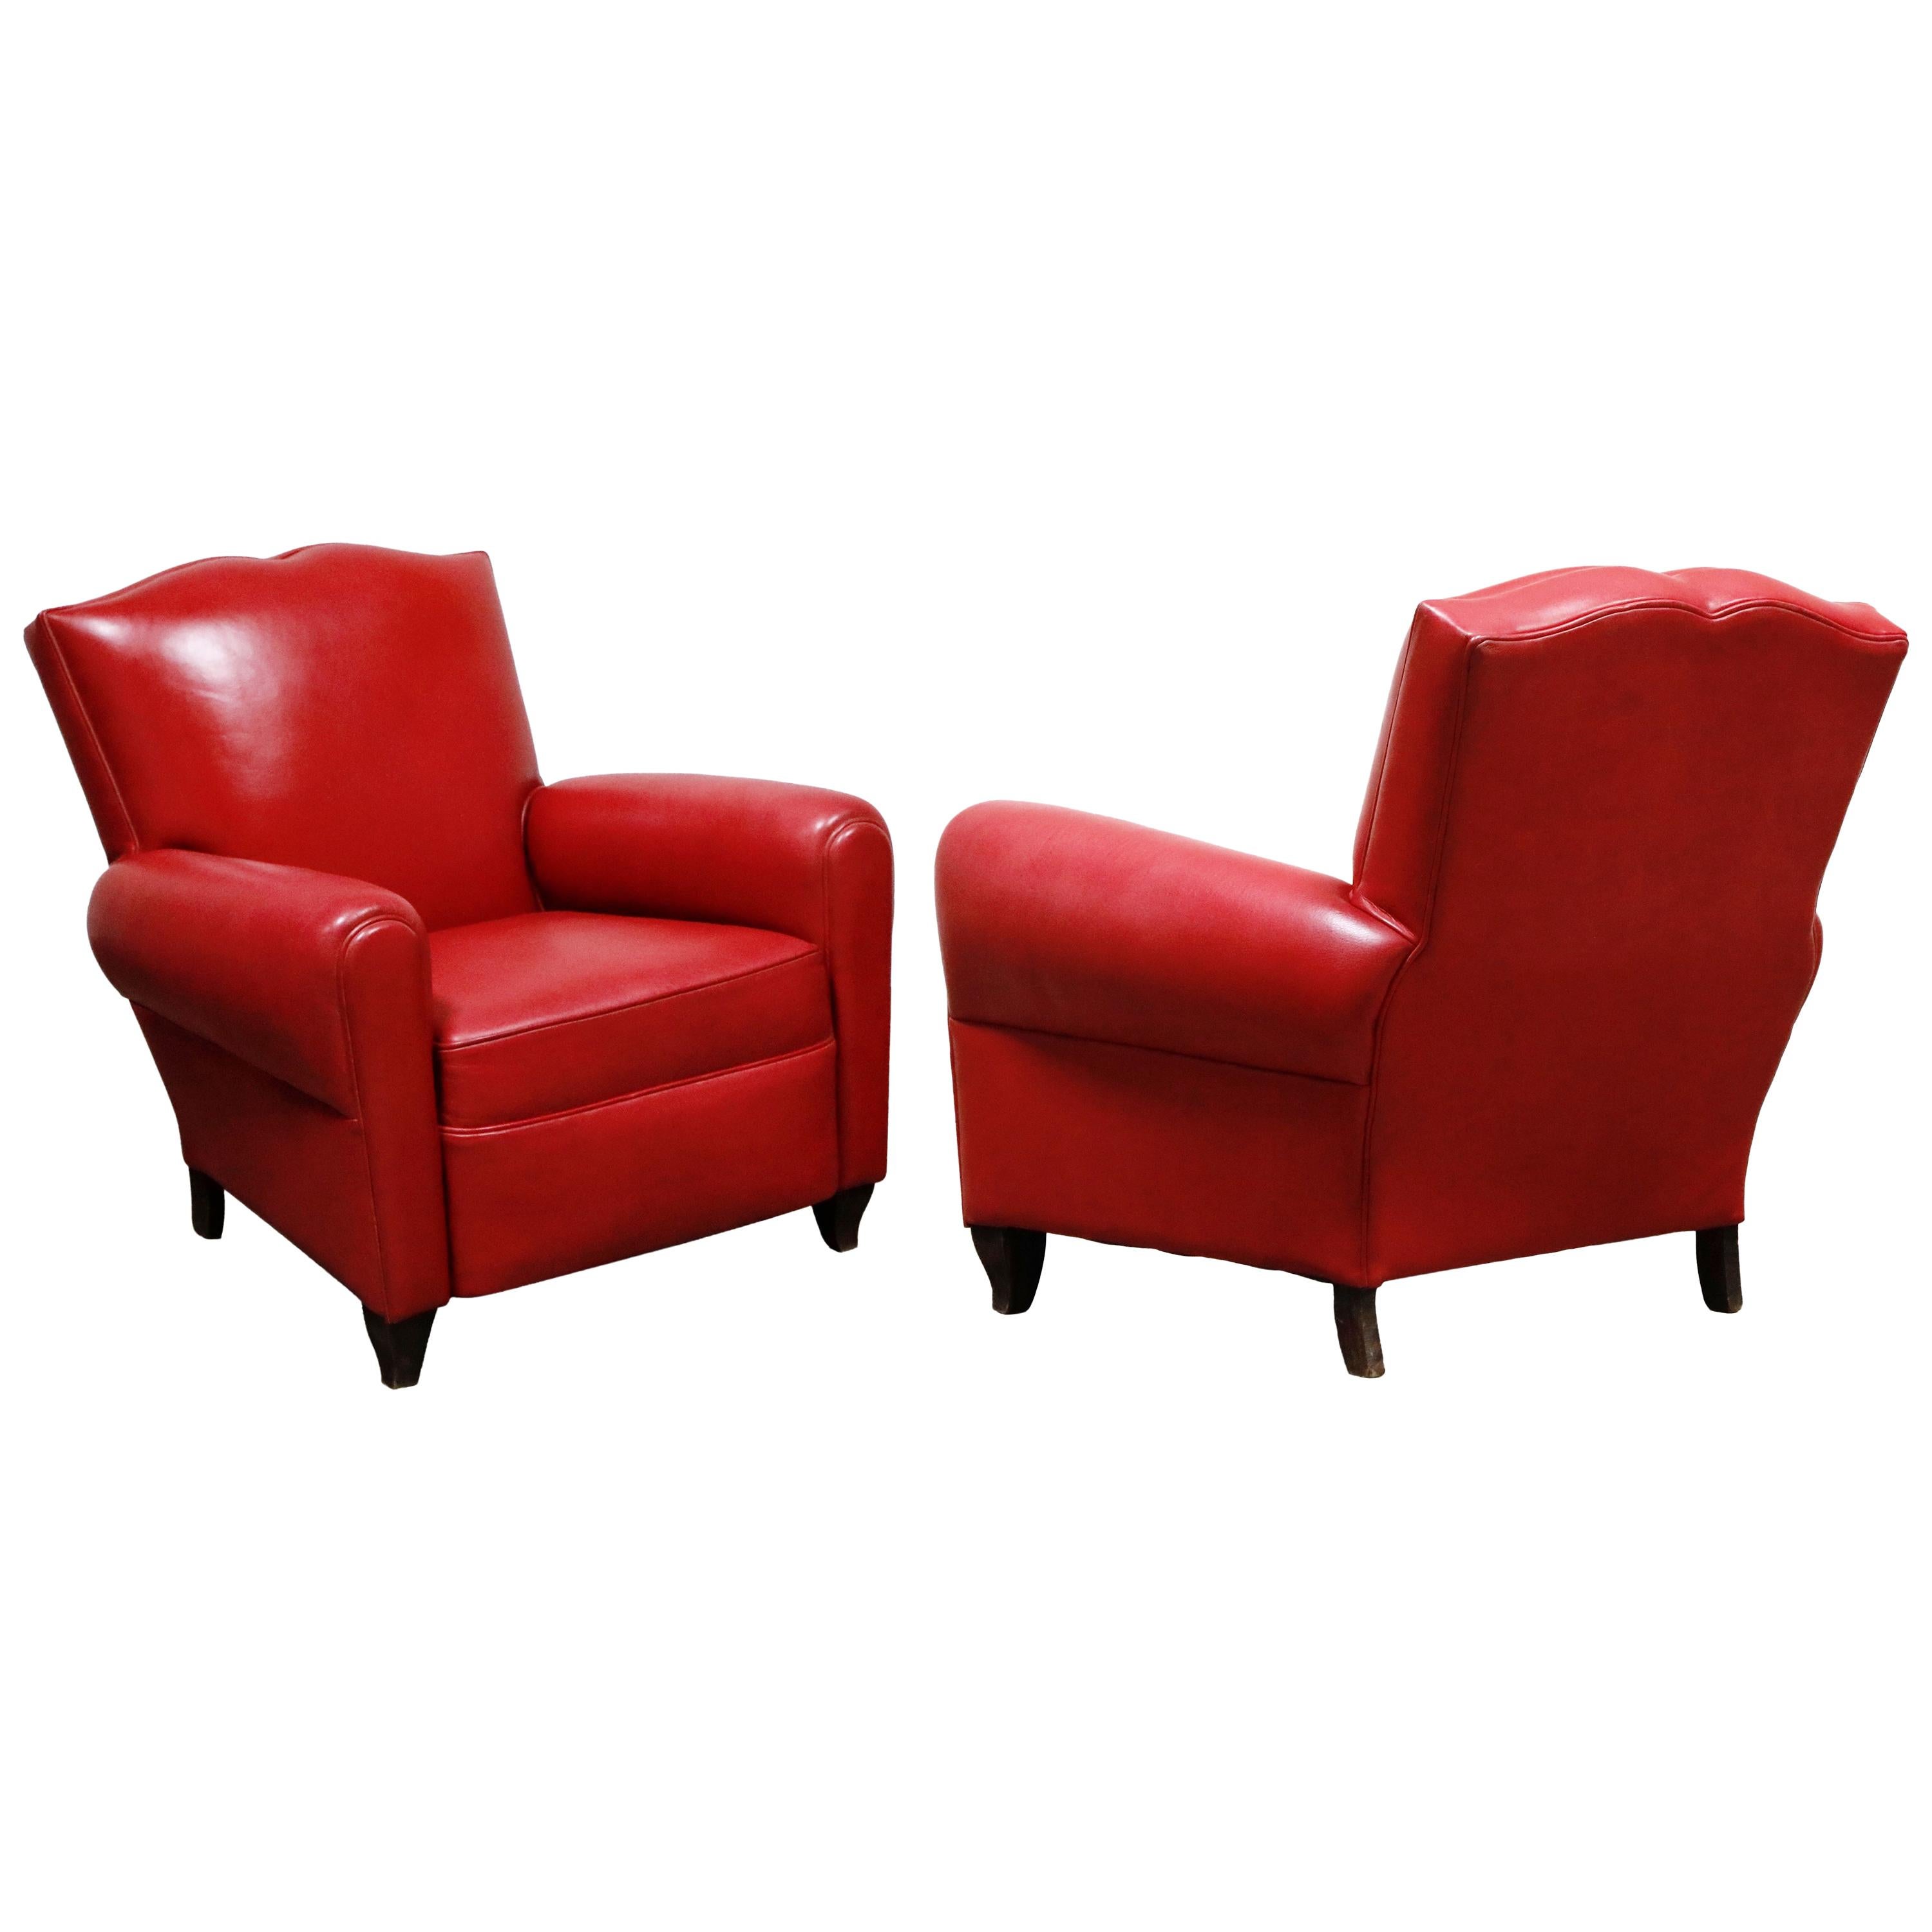 Red Leather Art Deco Mustache Club Chairs, Pair